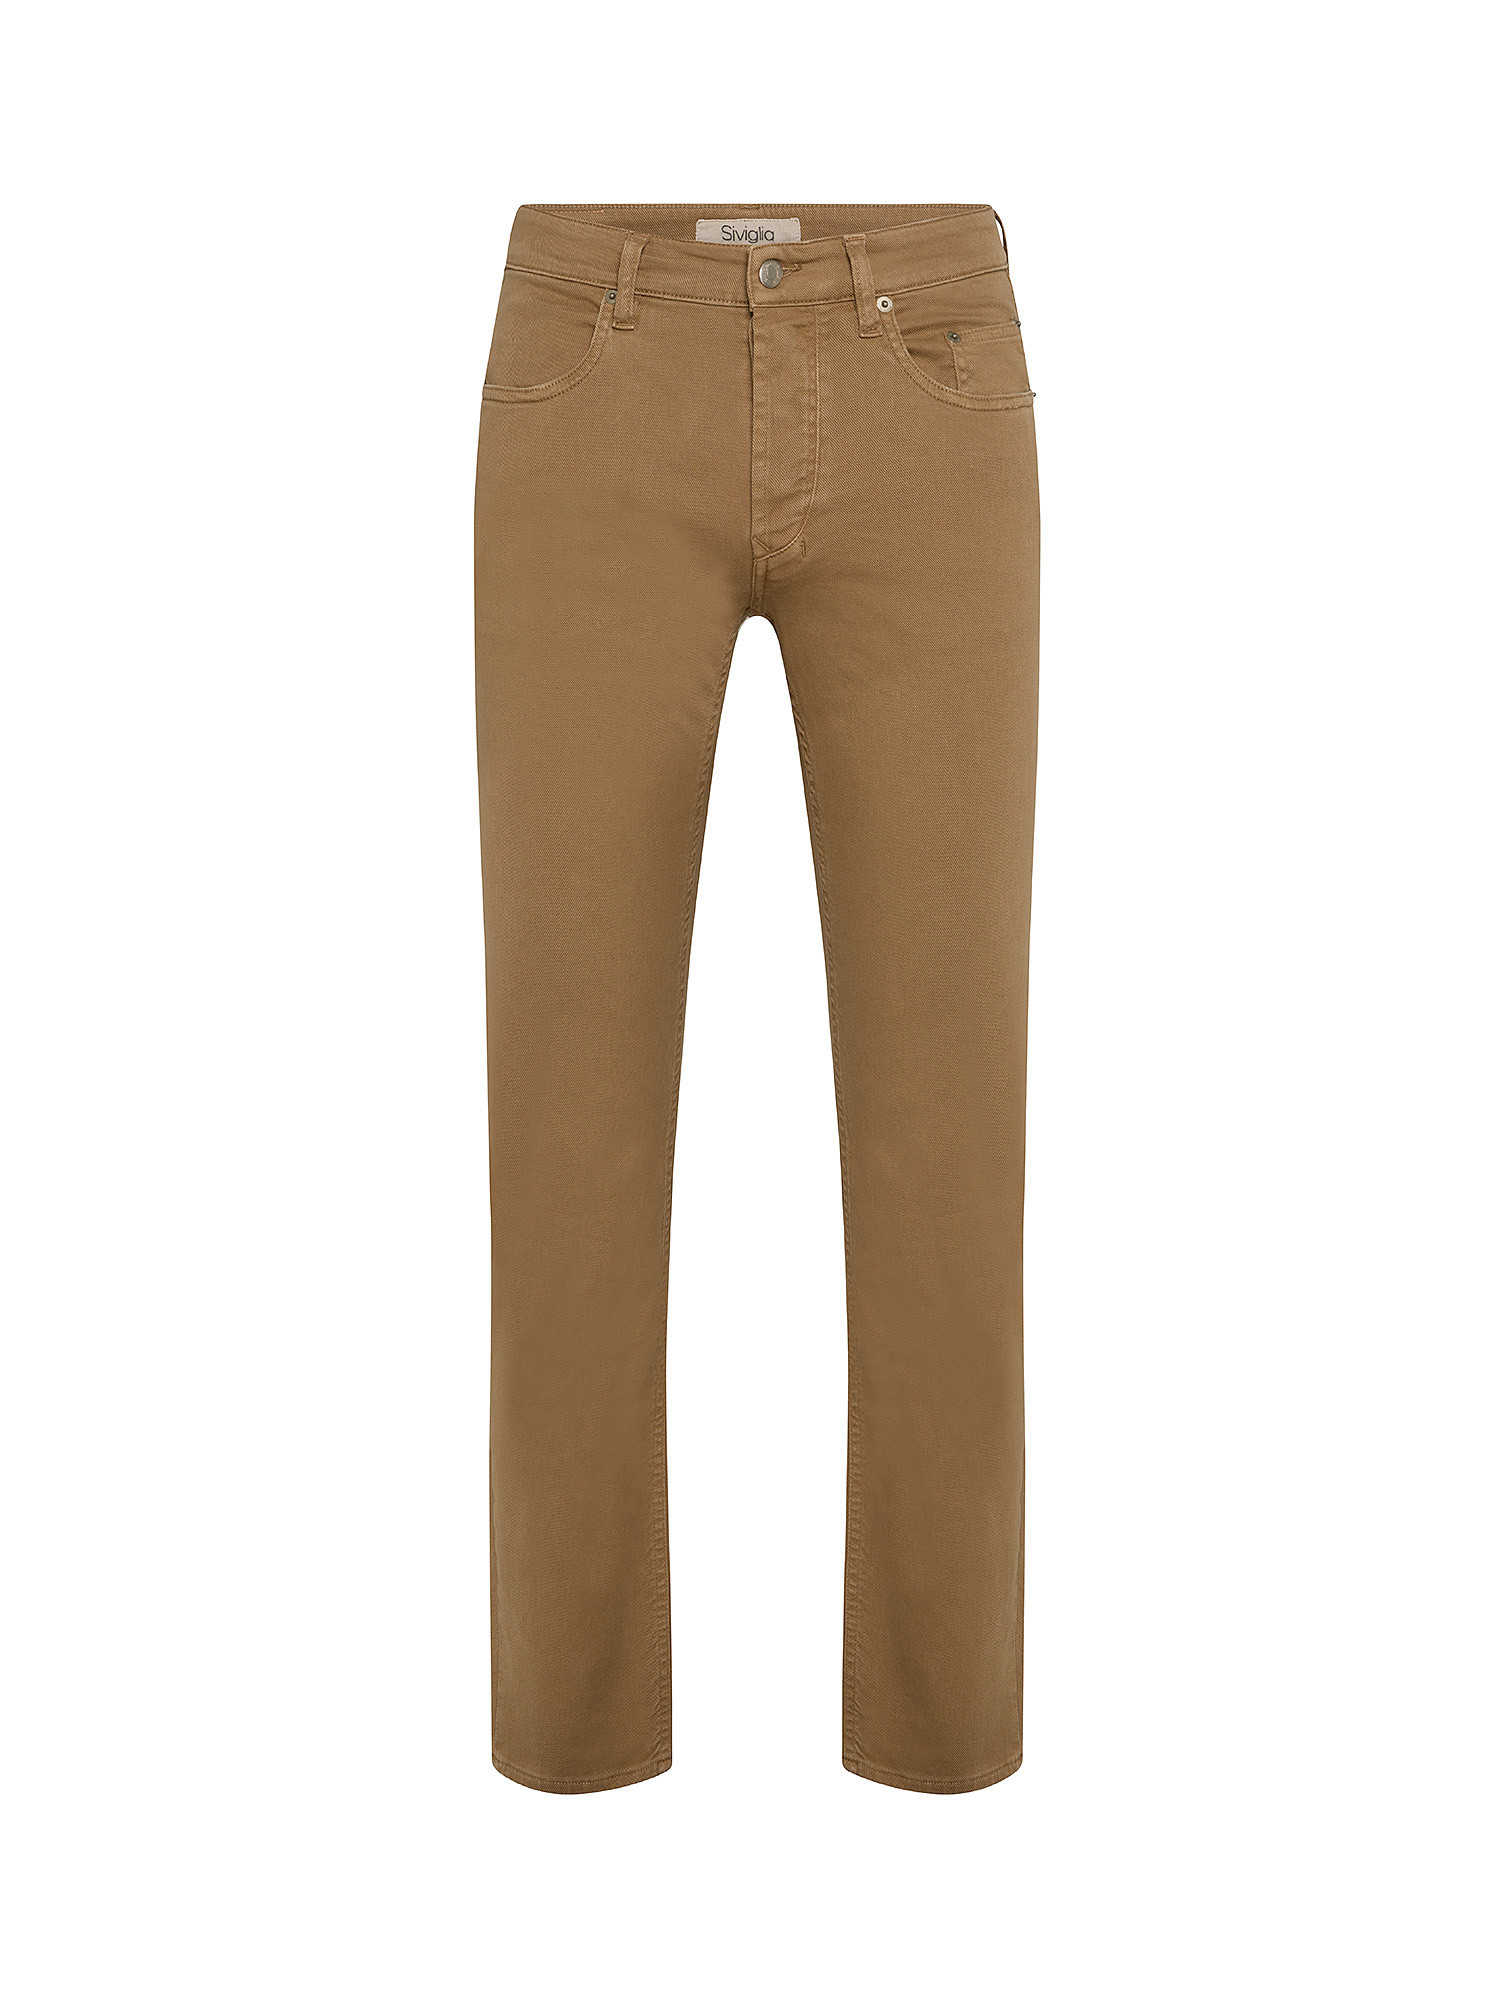 Siviglia - Five pocket trousers, Light Brown, large image number 0